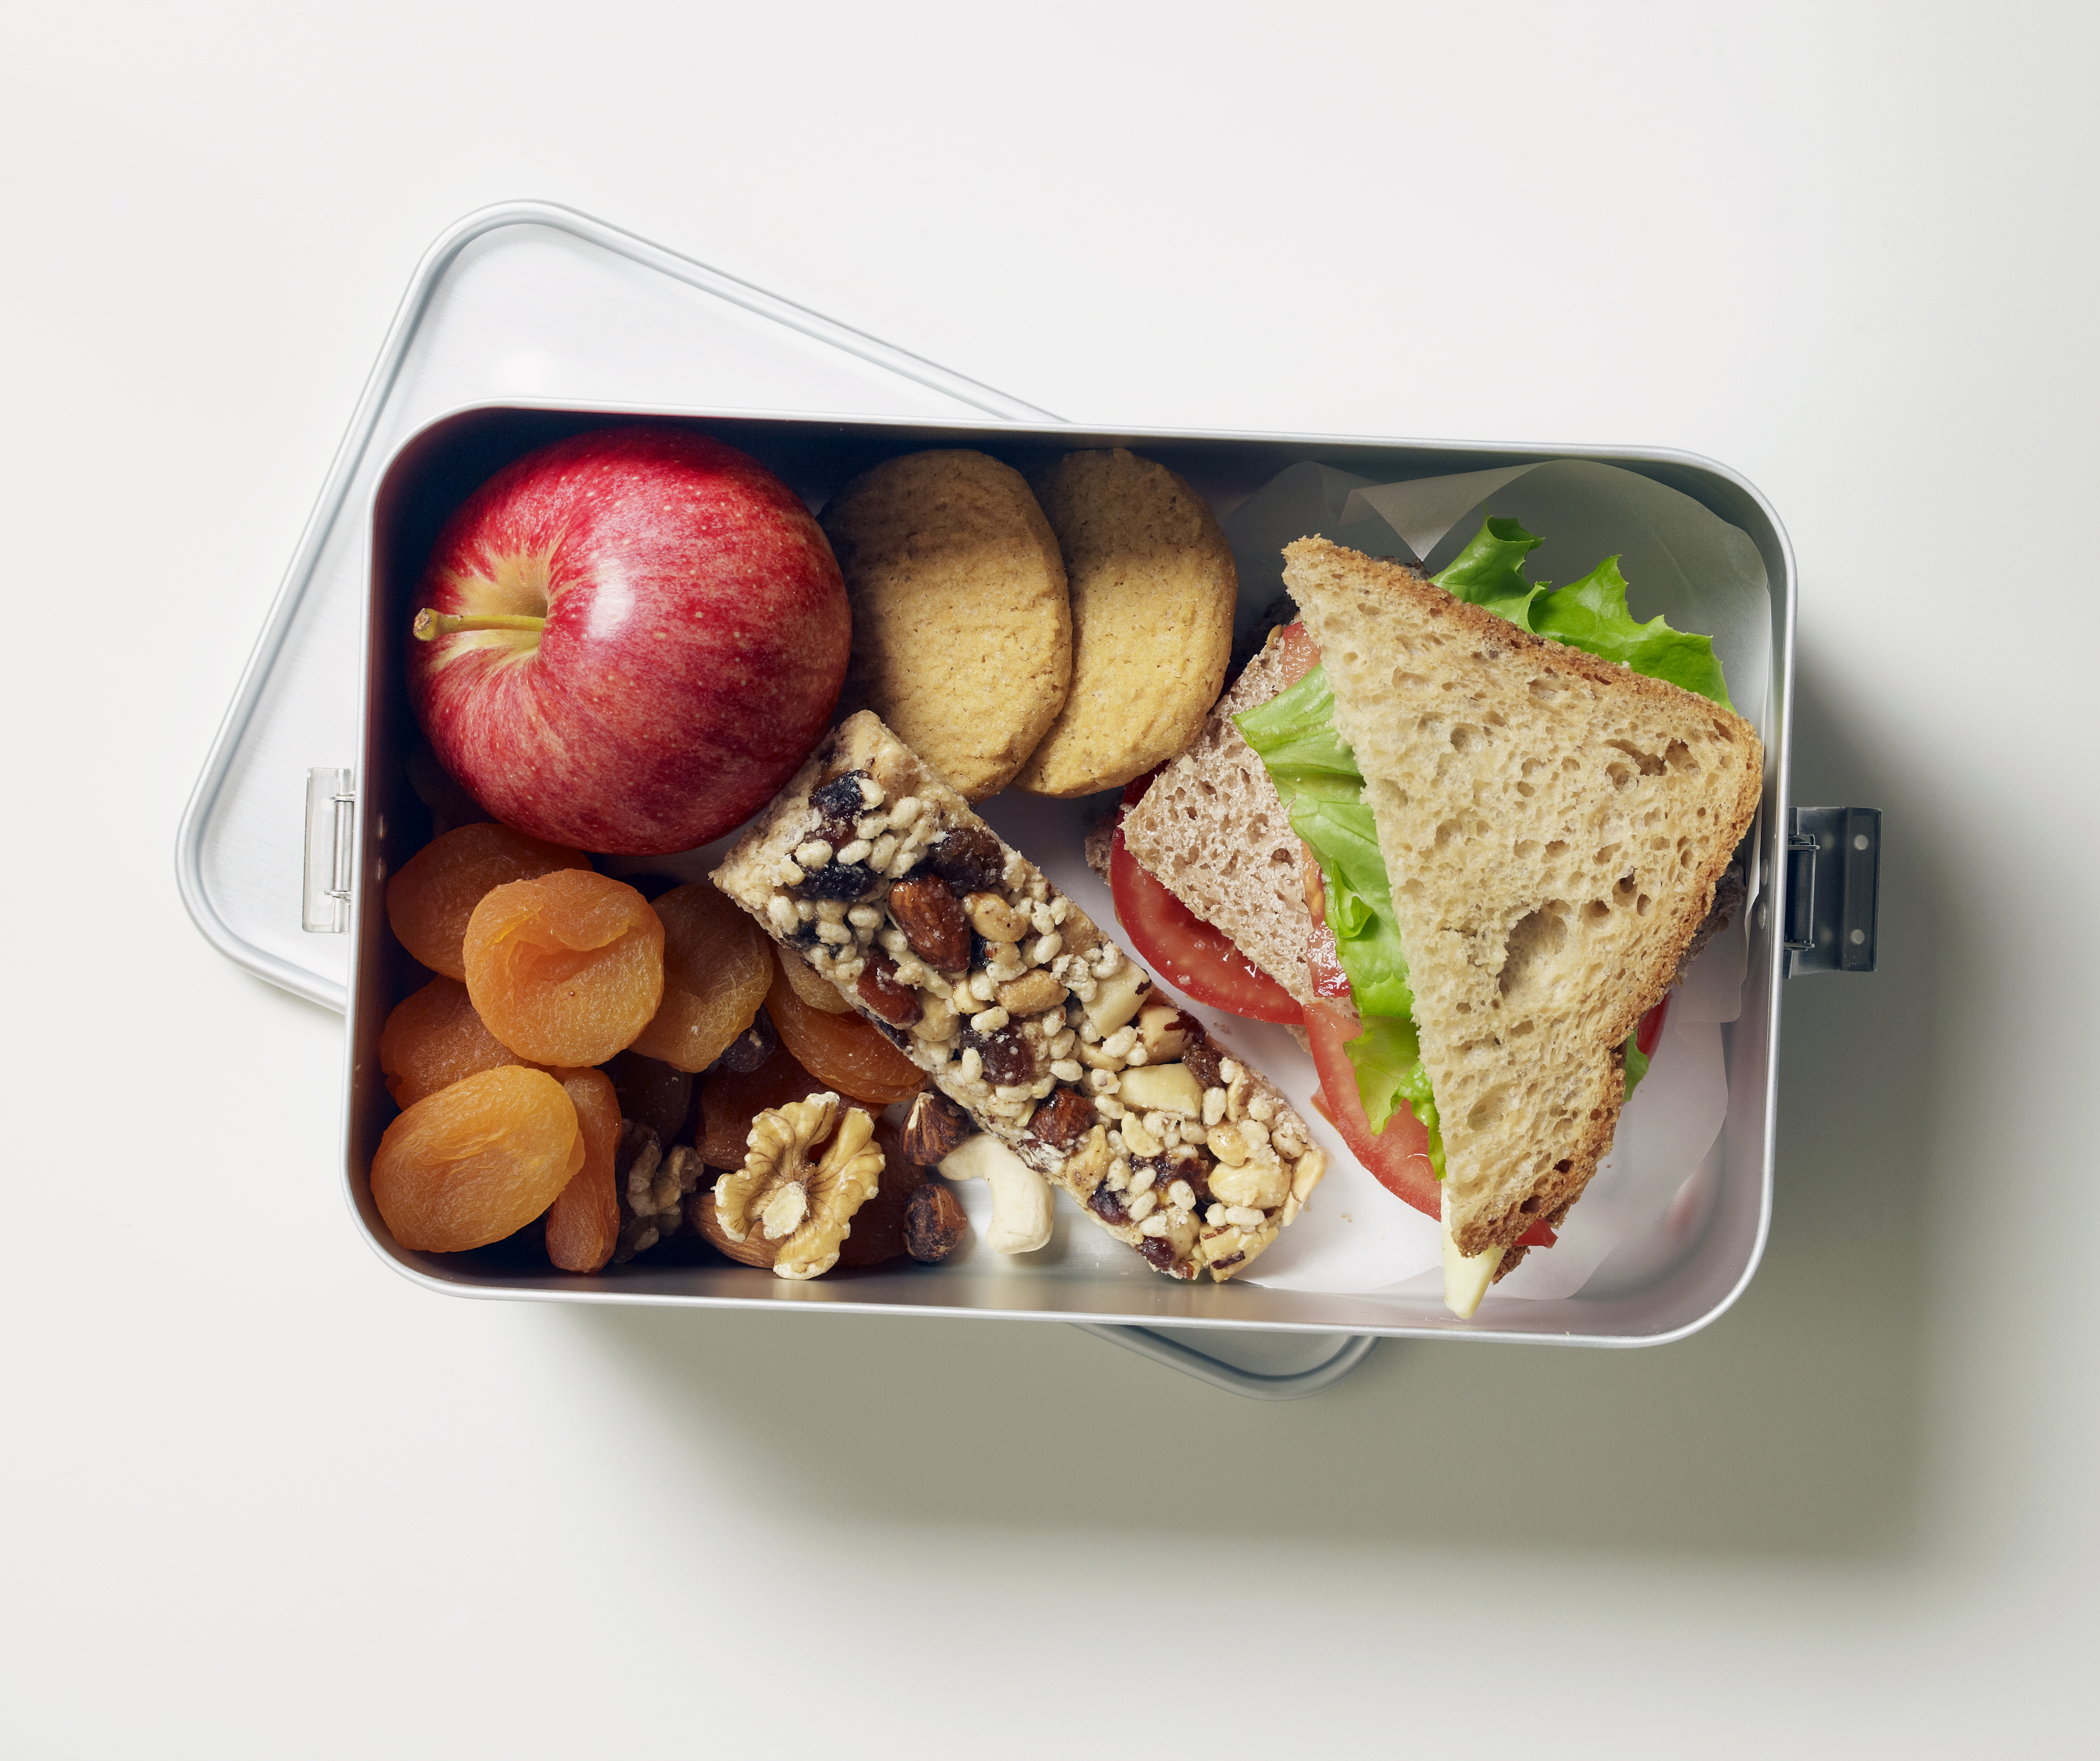 Gluten-free lunch box containing fruit, seed bar, biscuits and sandwiches